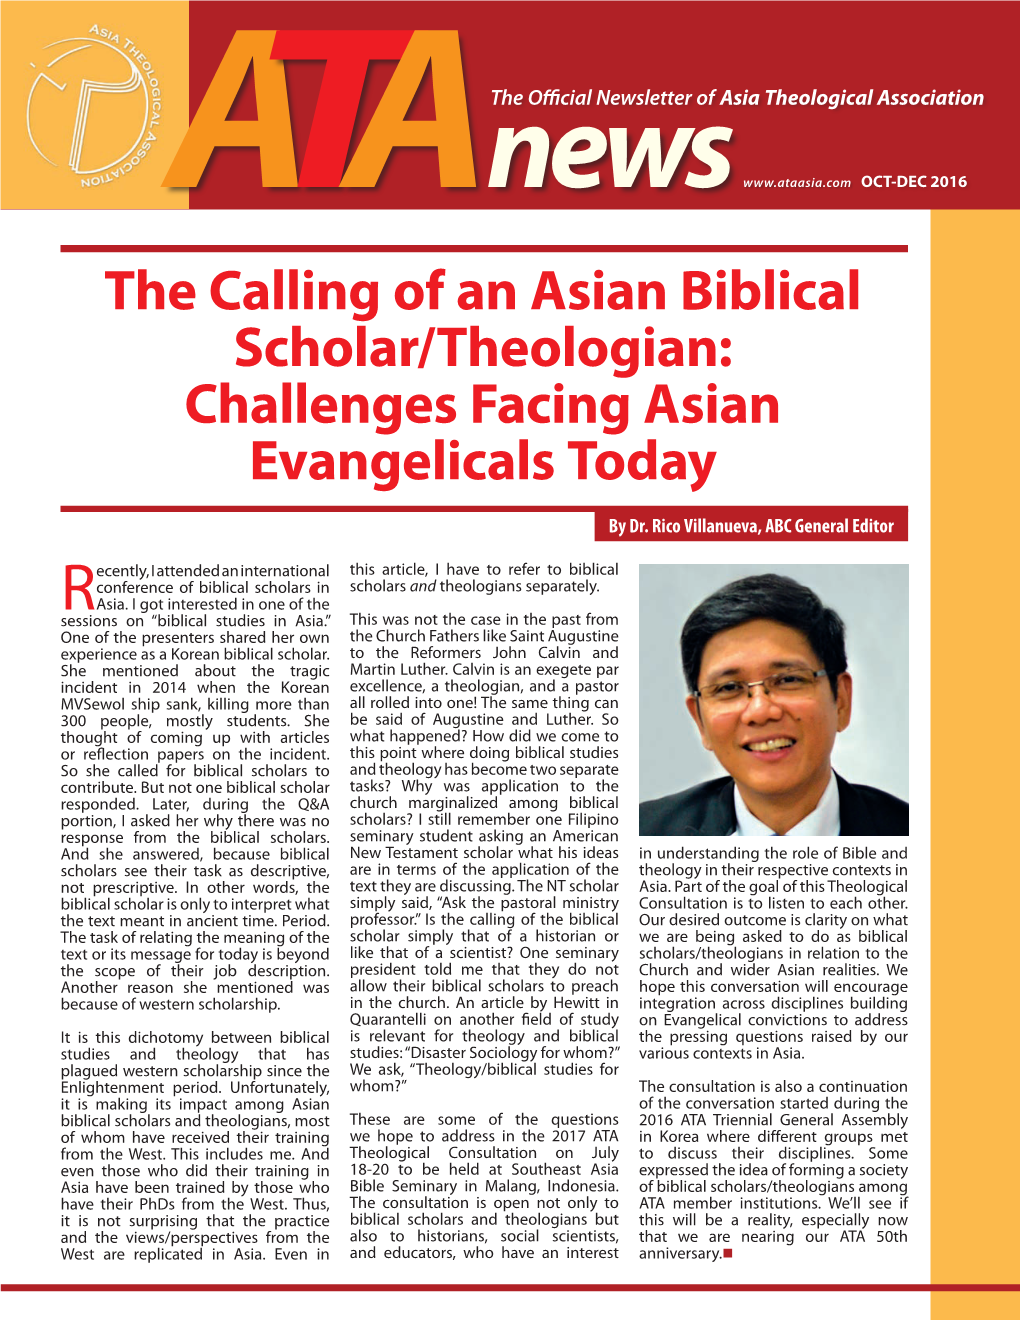 The Calling of an Asian Biblical Scholar/Theologian: Challenges Facing Asian Evangelicals Today